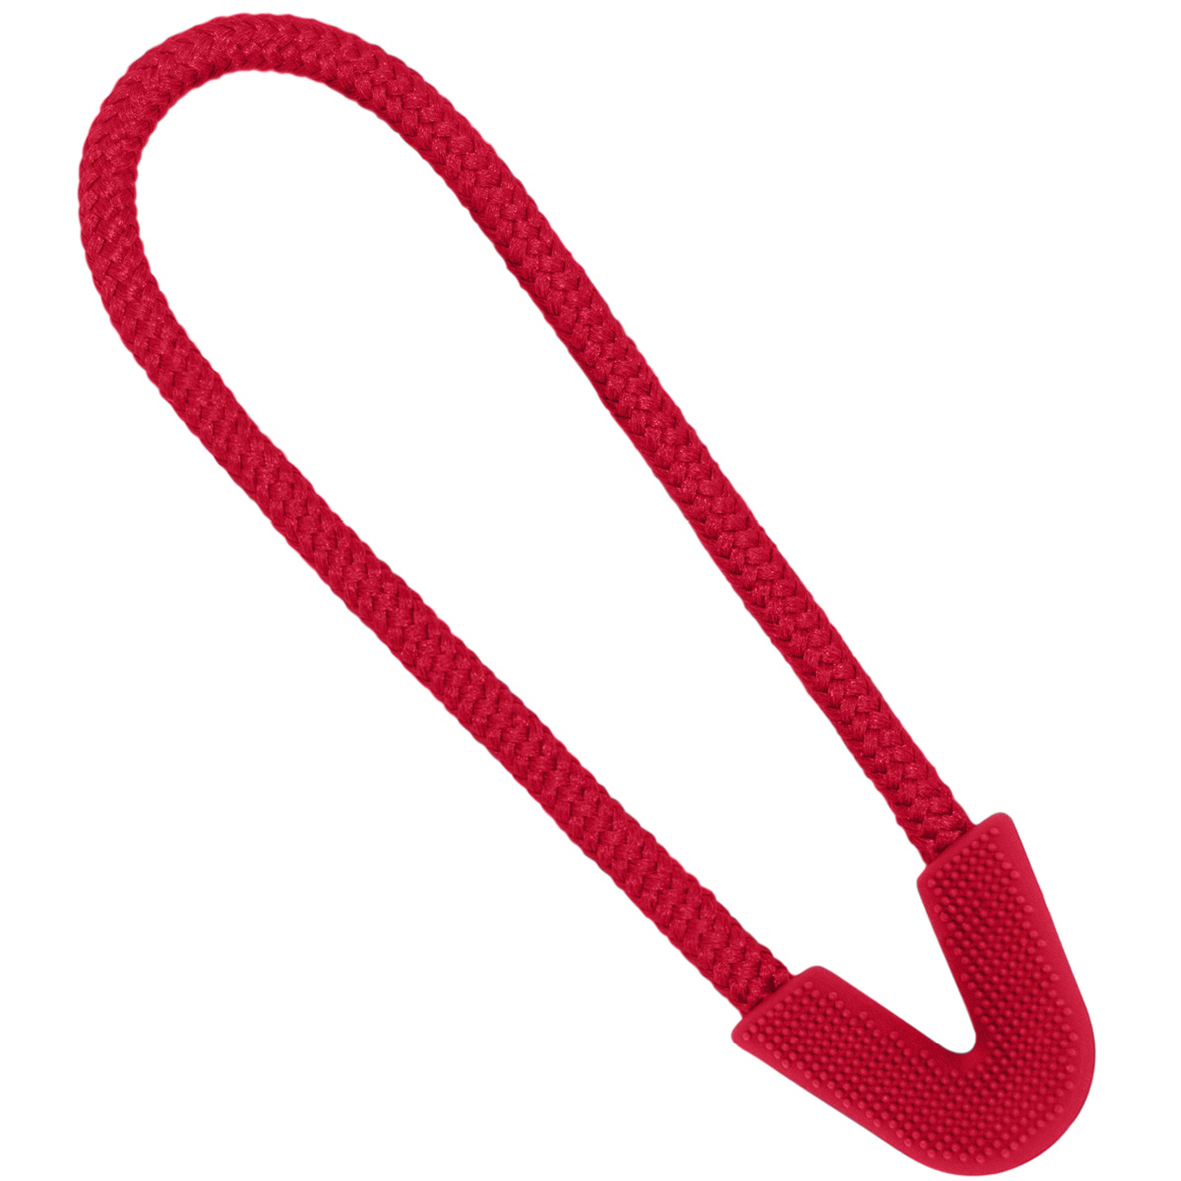 JAKO ZIP TAG, RED.